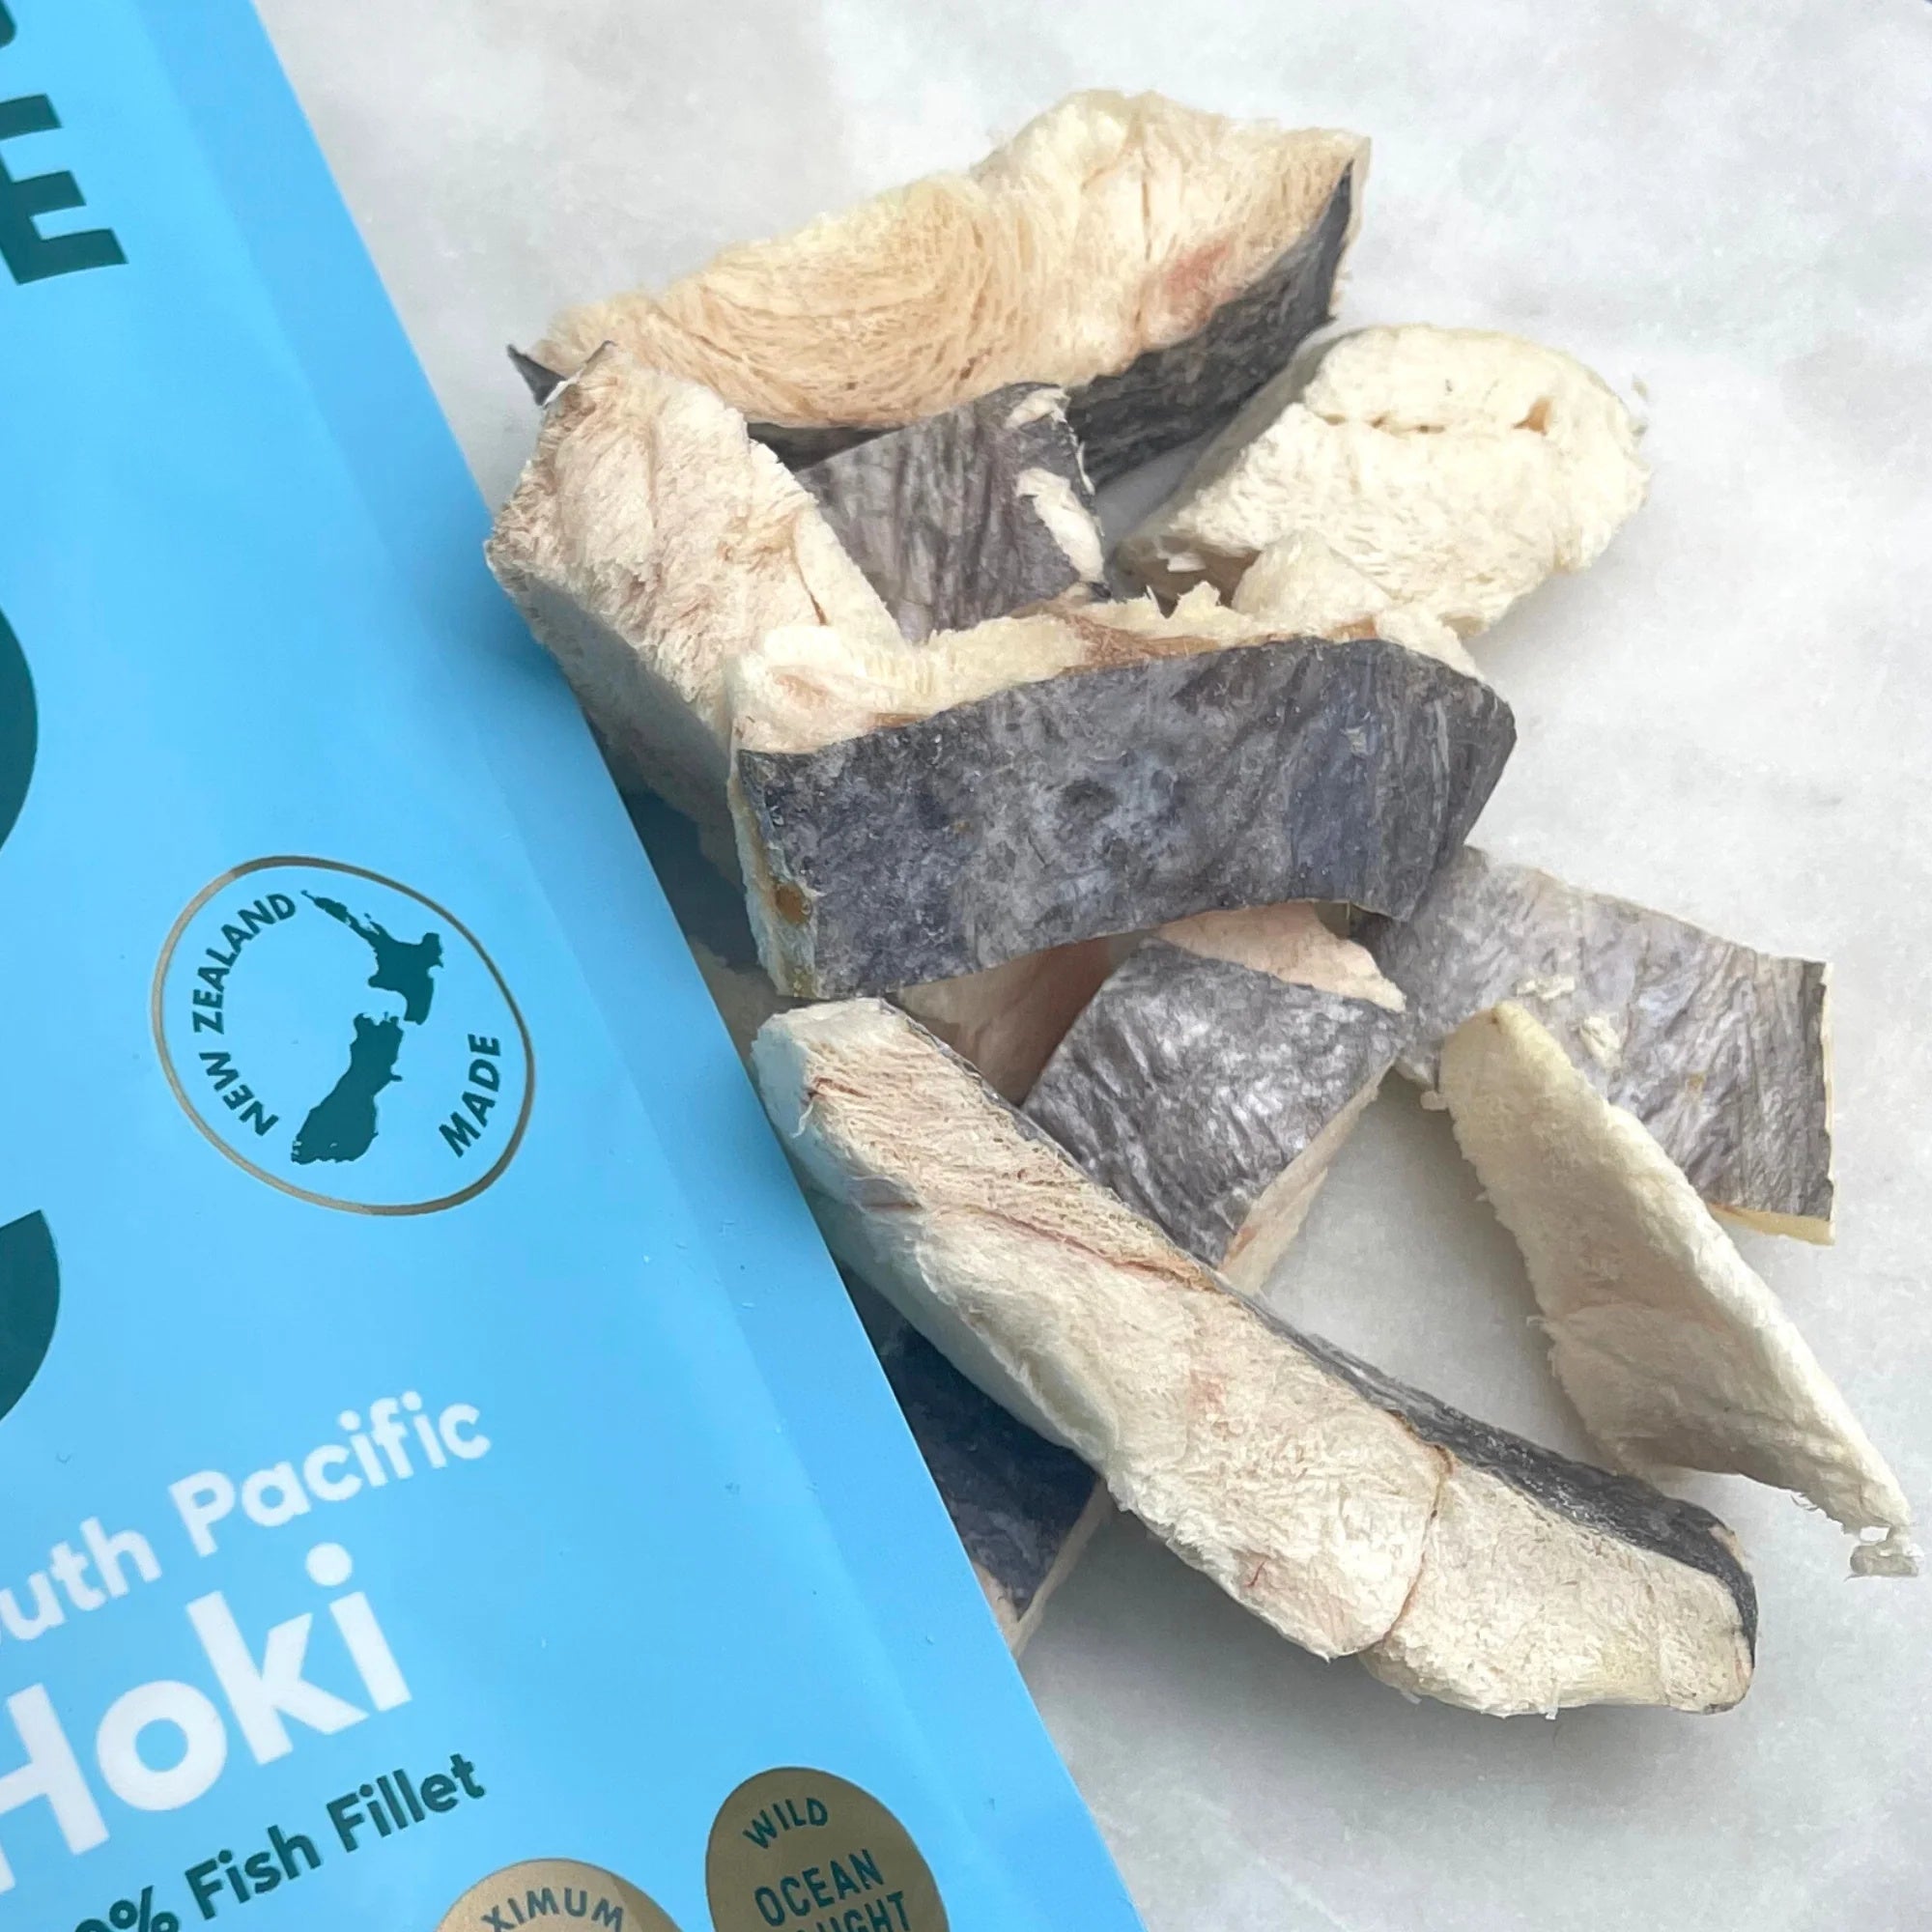 Gourmate 100% New Zealand South Pacific Blue Cod Fillets 45g (GMT03)